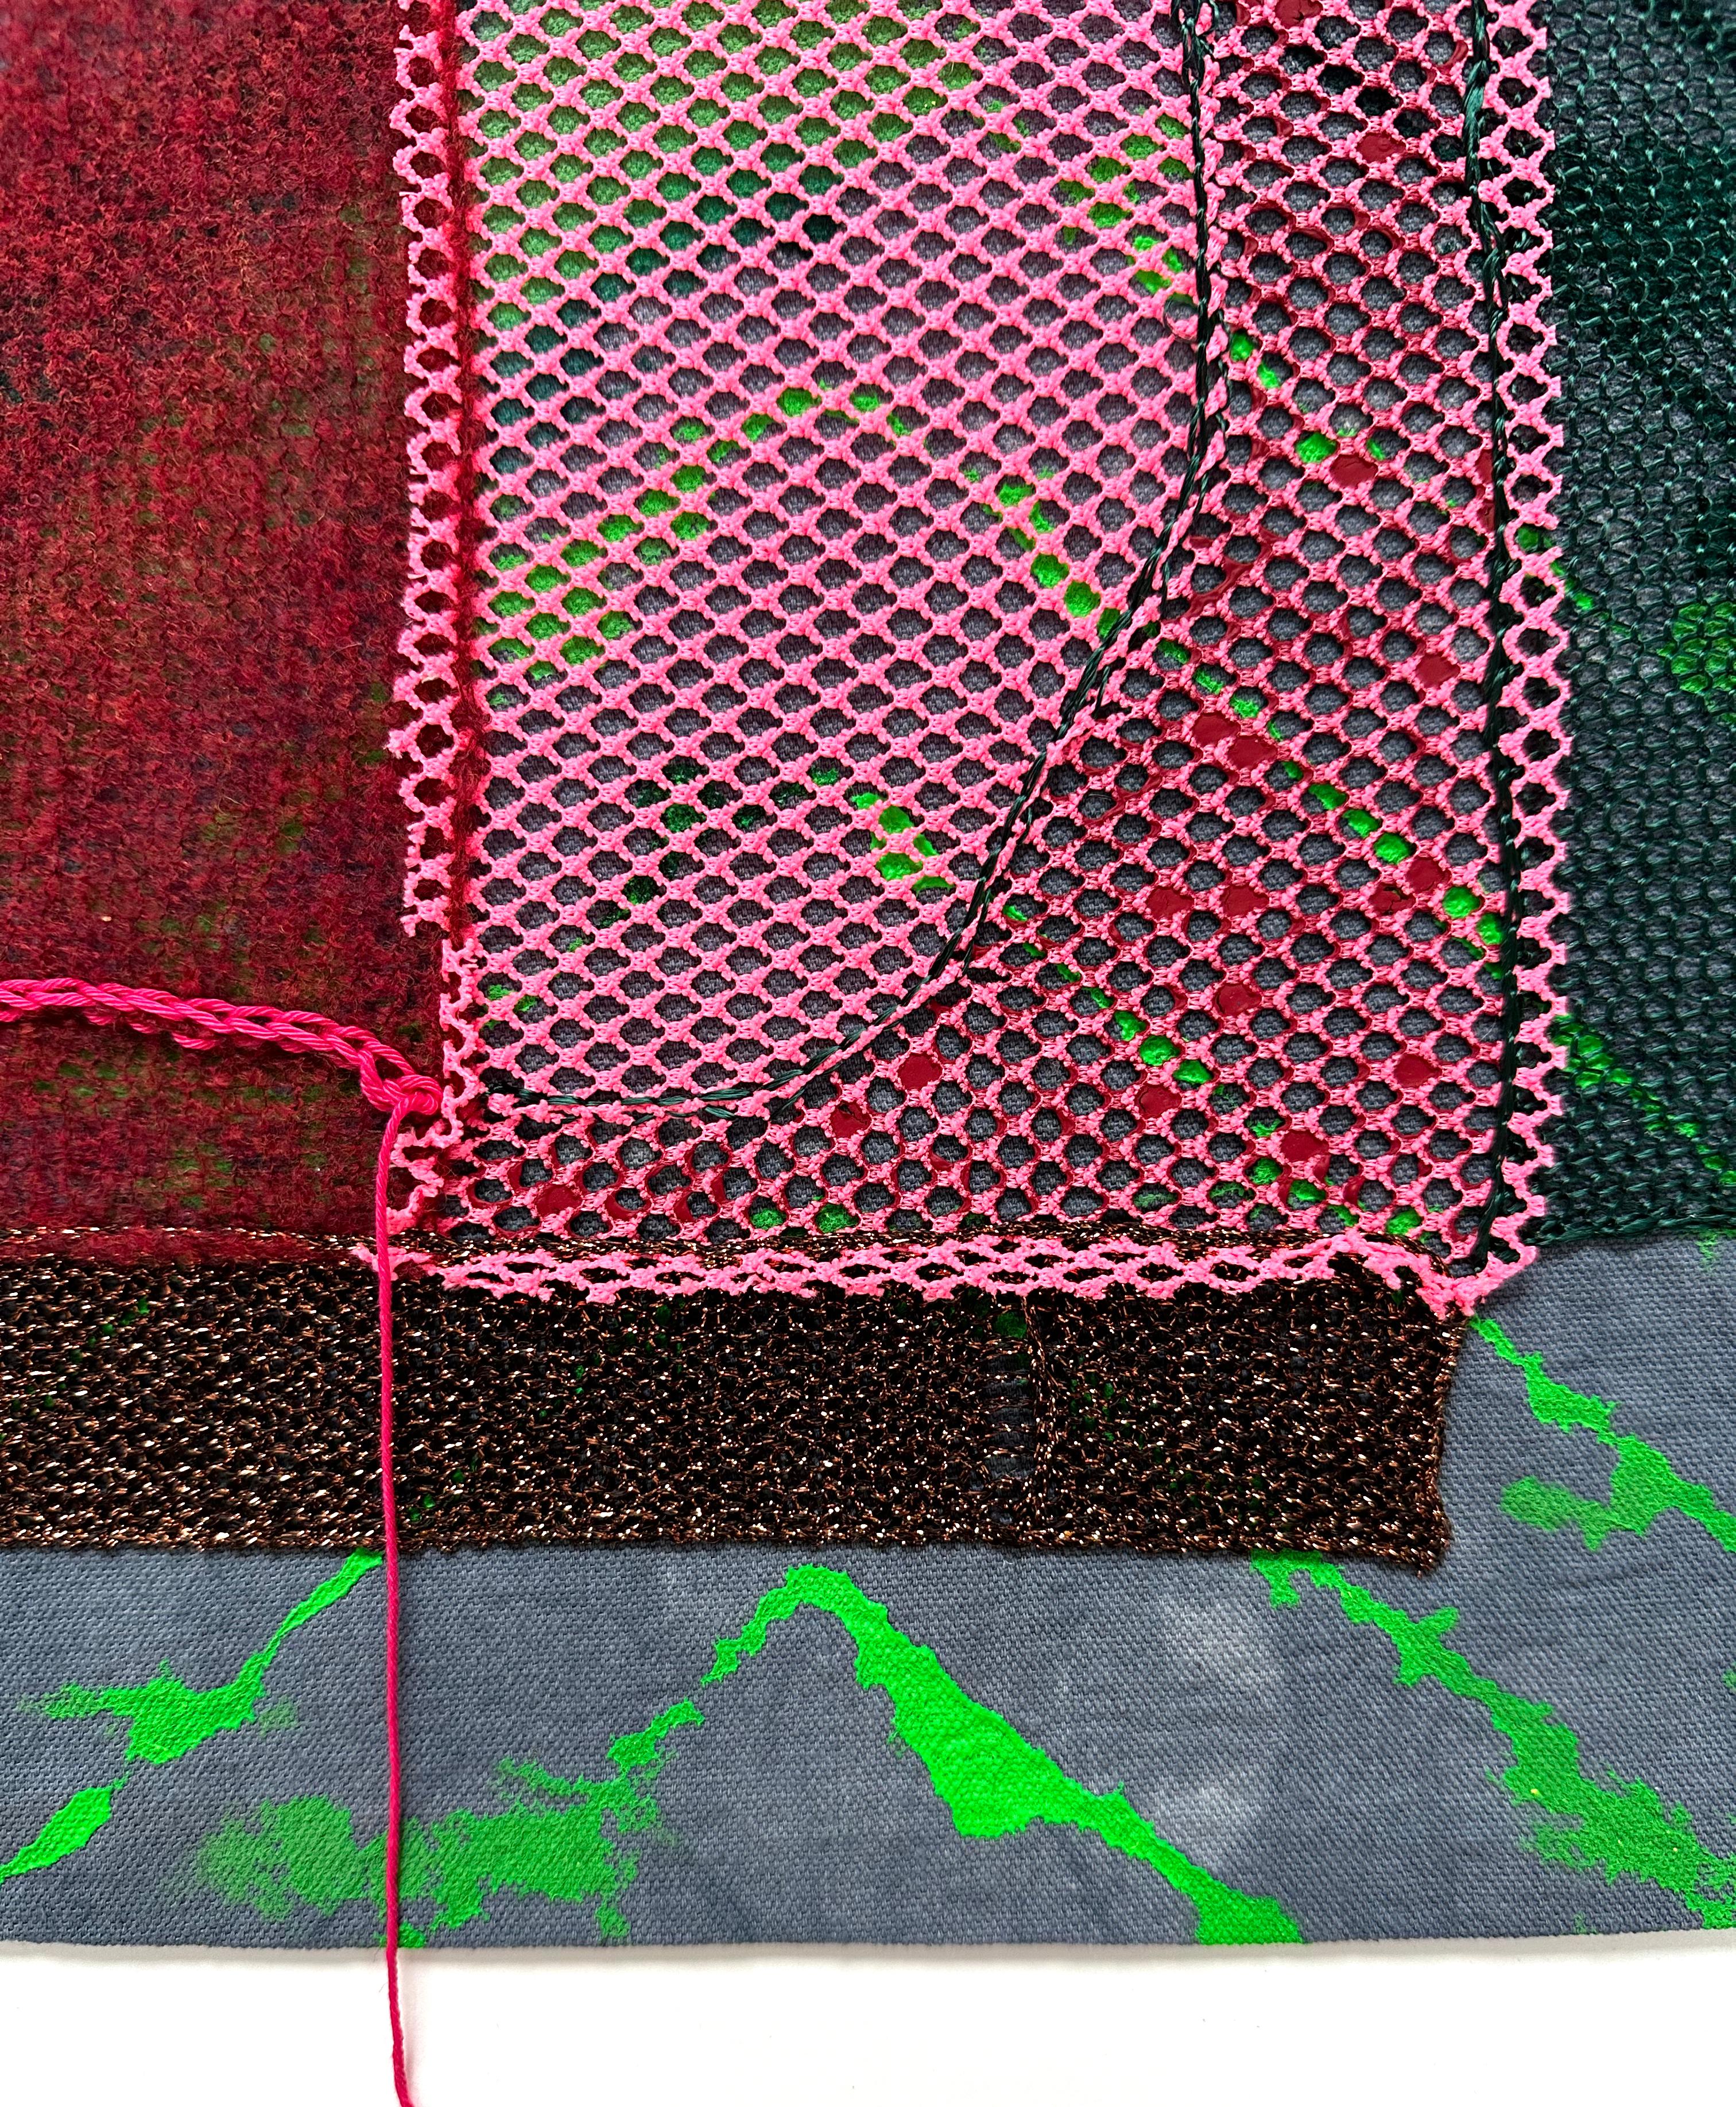 Hand-machine knitted thread, fluid acrylic on dyed fabric

Statement
My work is at the intersection of painting, object making, and immersive installation. I use various materials such as vintage threads, hand-dyed fabrics, burlap, canvas, paint,